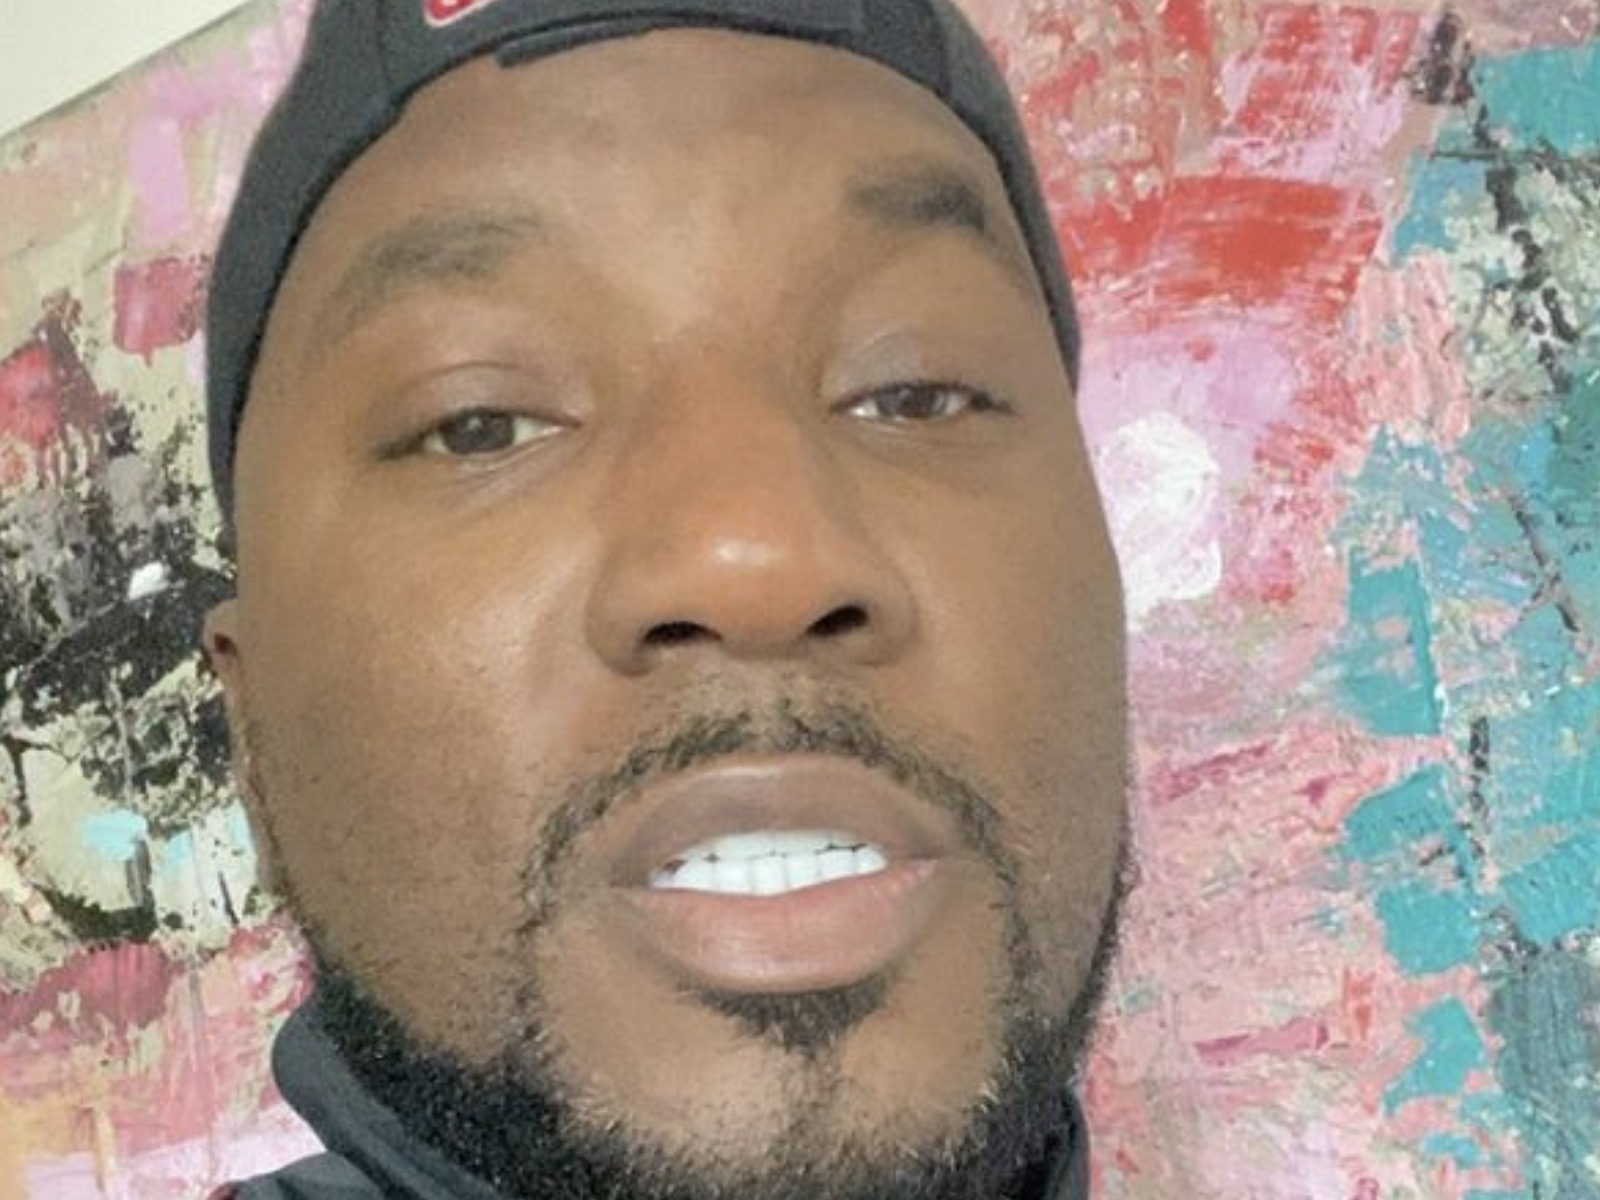 Jeezy Gives Life Advice On When Things Go Wrong